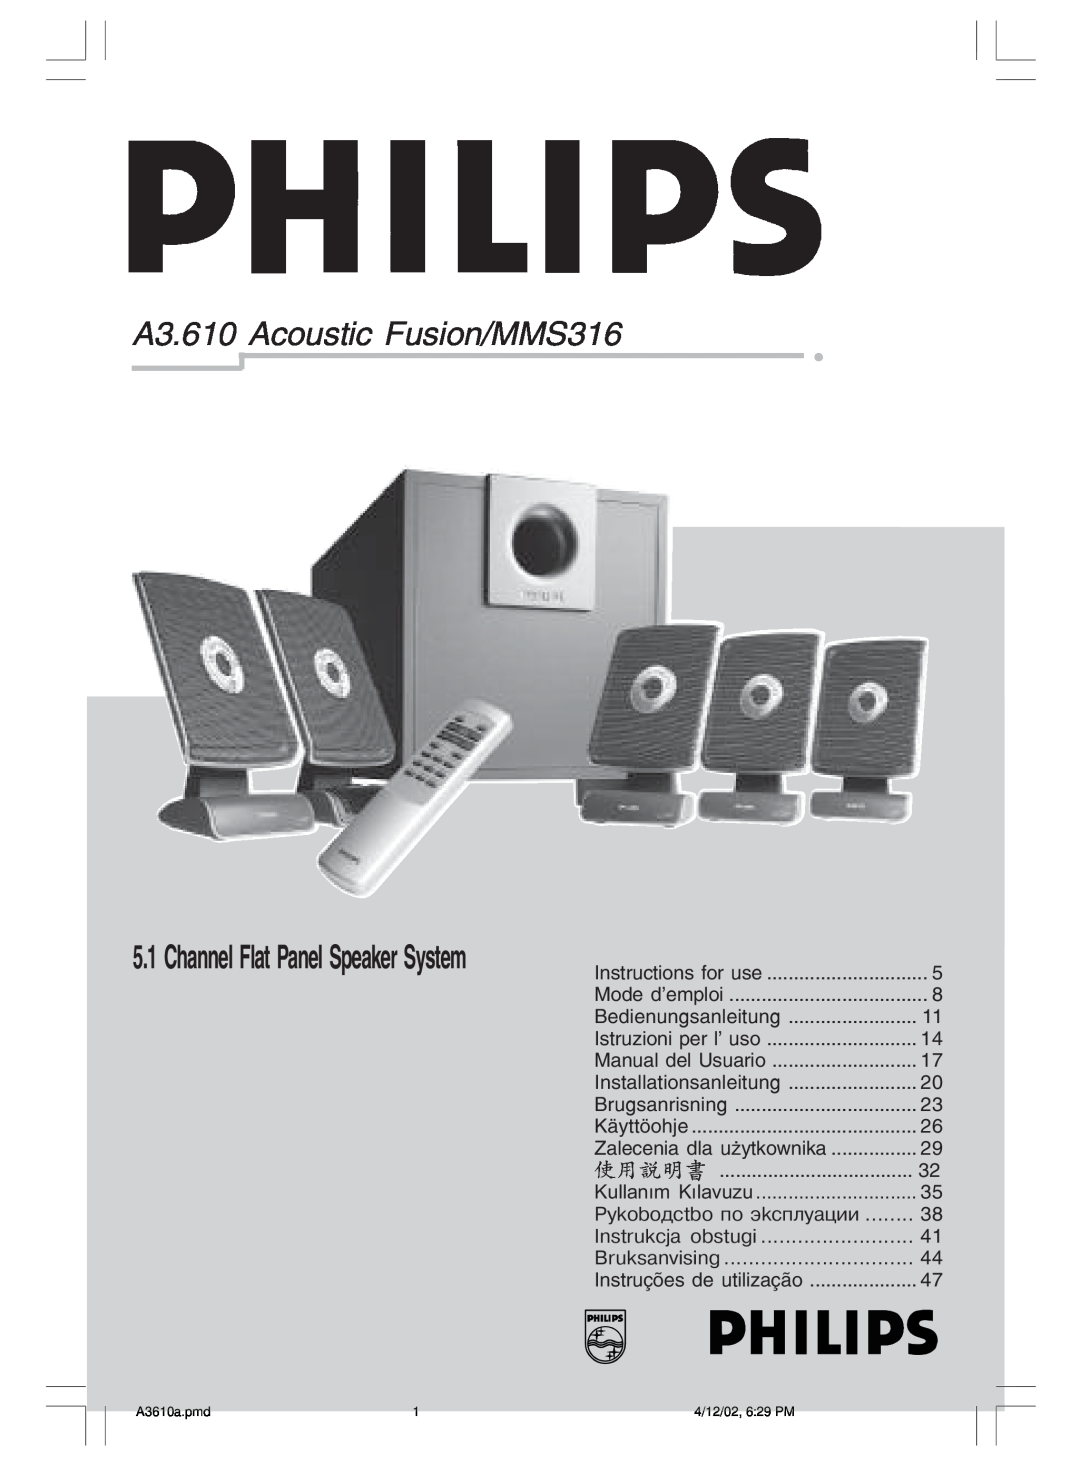 Philips manual A3.610 Acoustic Fusion/MMS316, Channel Flat Panel Speaker System 